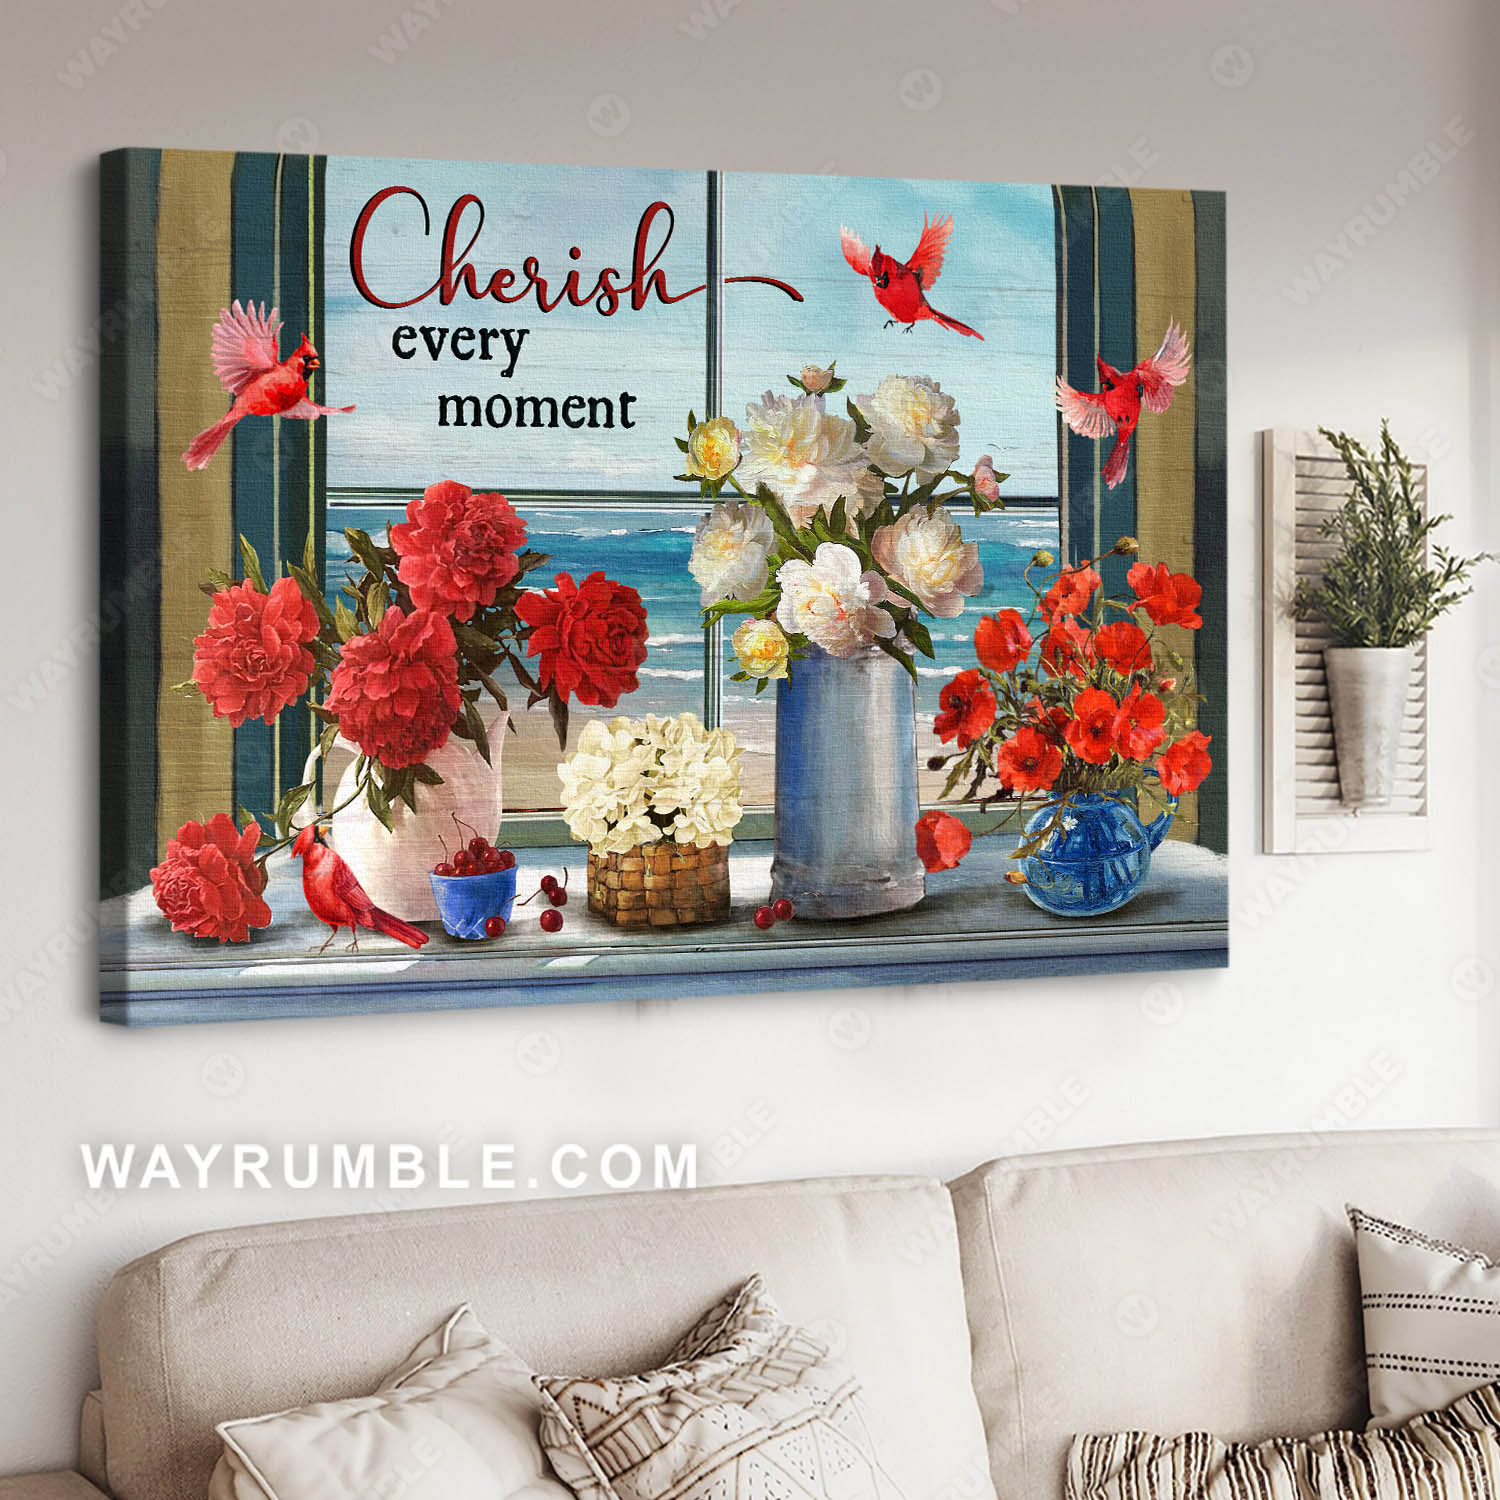 Vintage painting, Cardinals, Red and white flower vase, Beach view window, Still life drawing Cherish every moment - Jesus Landscape Canvas Prints, Christian Wall Art